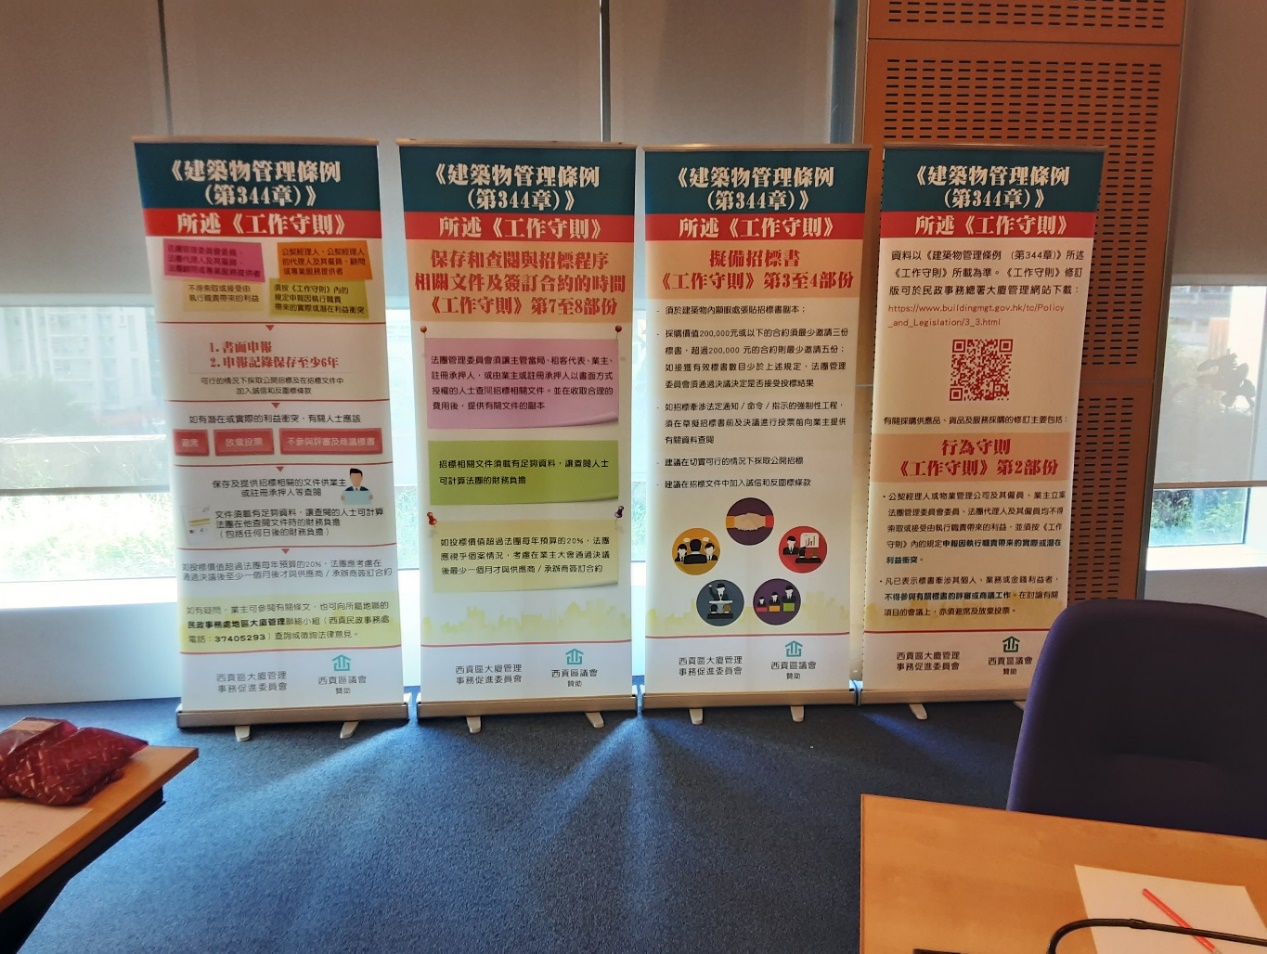 Sai Kung District Roving Exhibition of Easy Roll Banners on the “Codes of Practice under the Building Management Ordinance (Cap. 344)” (Meeting Room, 3/F, Sai Kung Tseung Kwan O Government Complex) (26 August 2021)